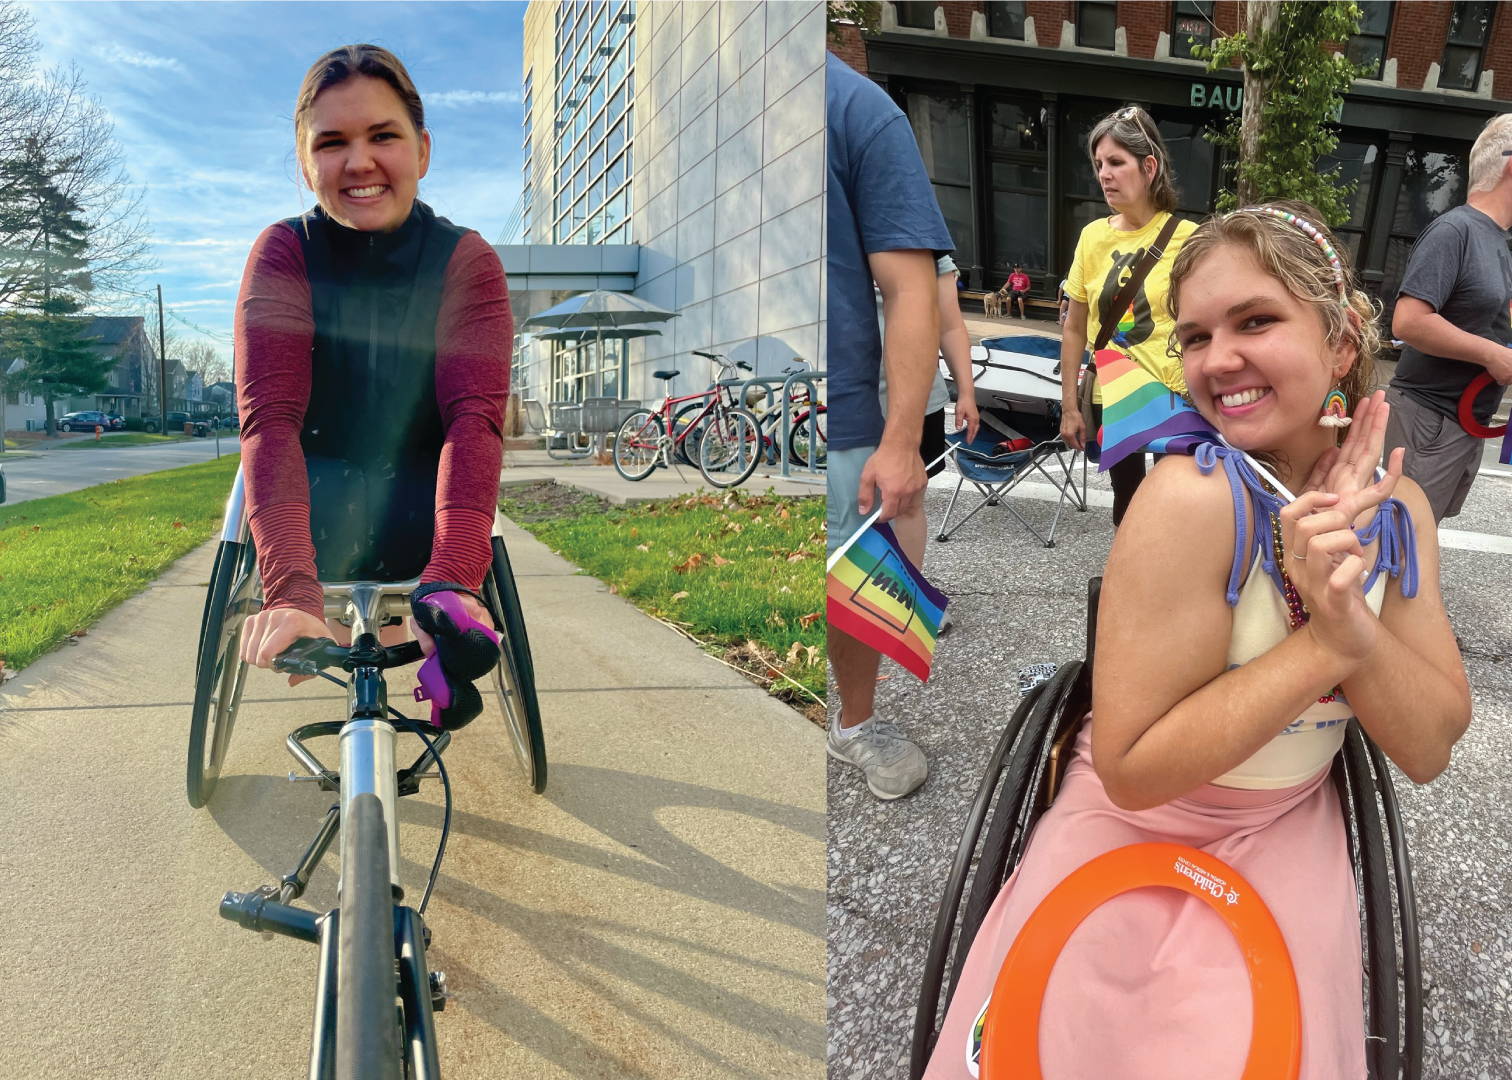 Left image: Eva smiling from her racing wheelchair. Right image: Eva smiling at a Pride event